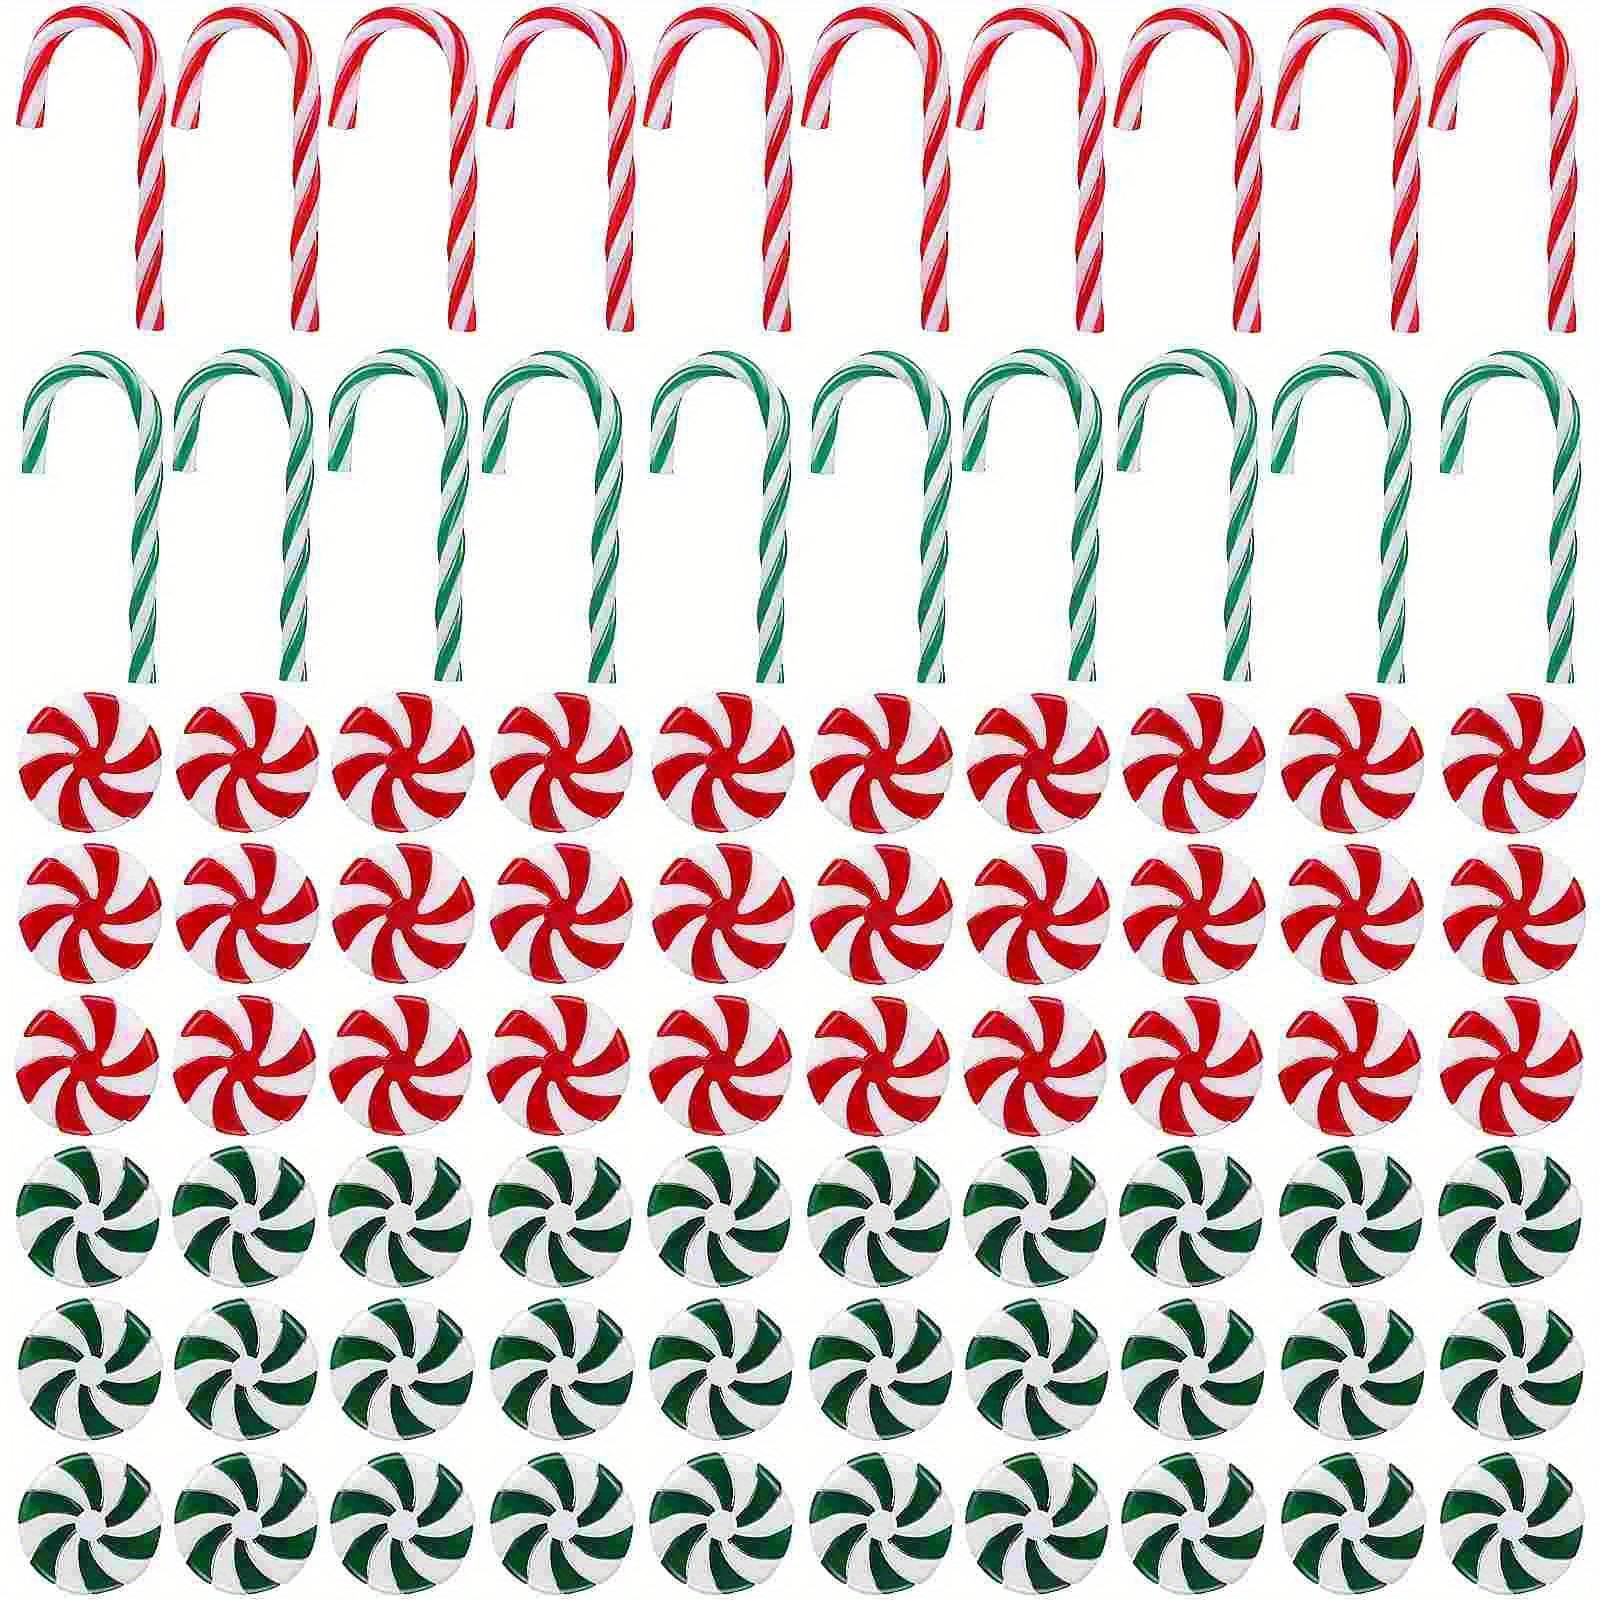 

80pcs Candy Cane Christmas Hanging Ornaments Candy Cane For Xmas Wreath Home Party Supplies